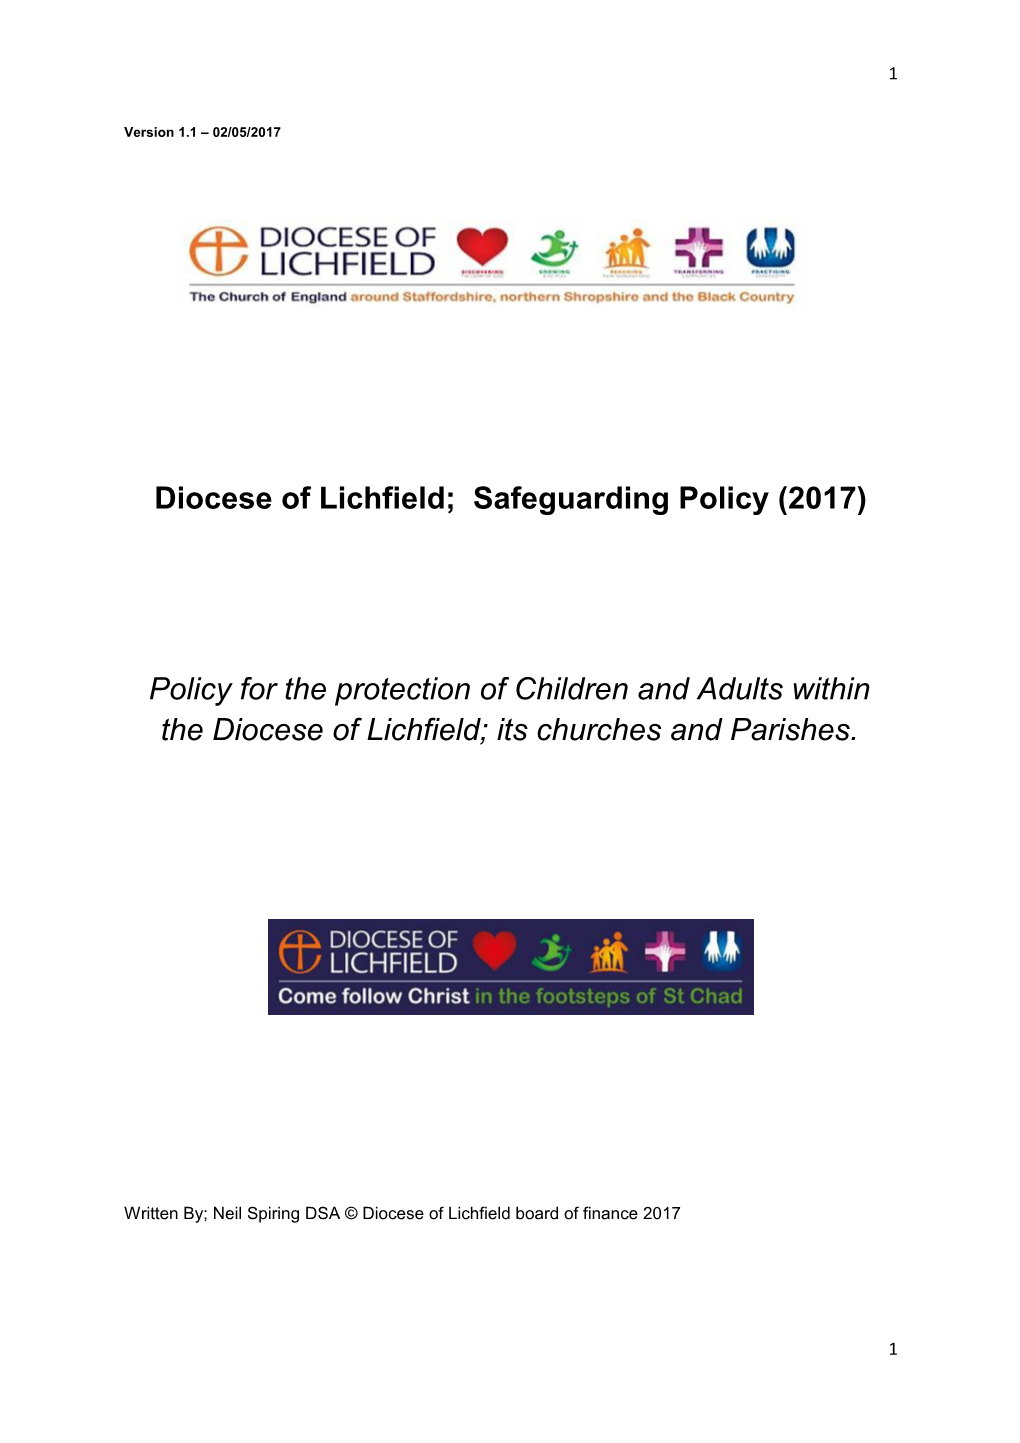 Diocese of Lichfield; Safeguardingpolicy (2017)